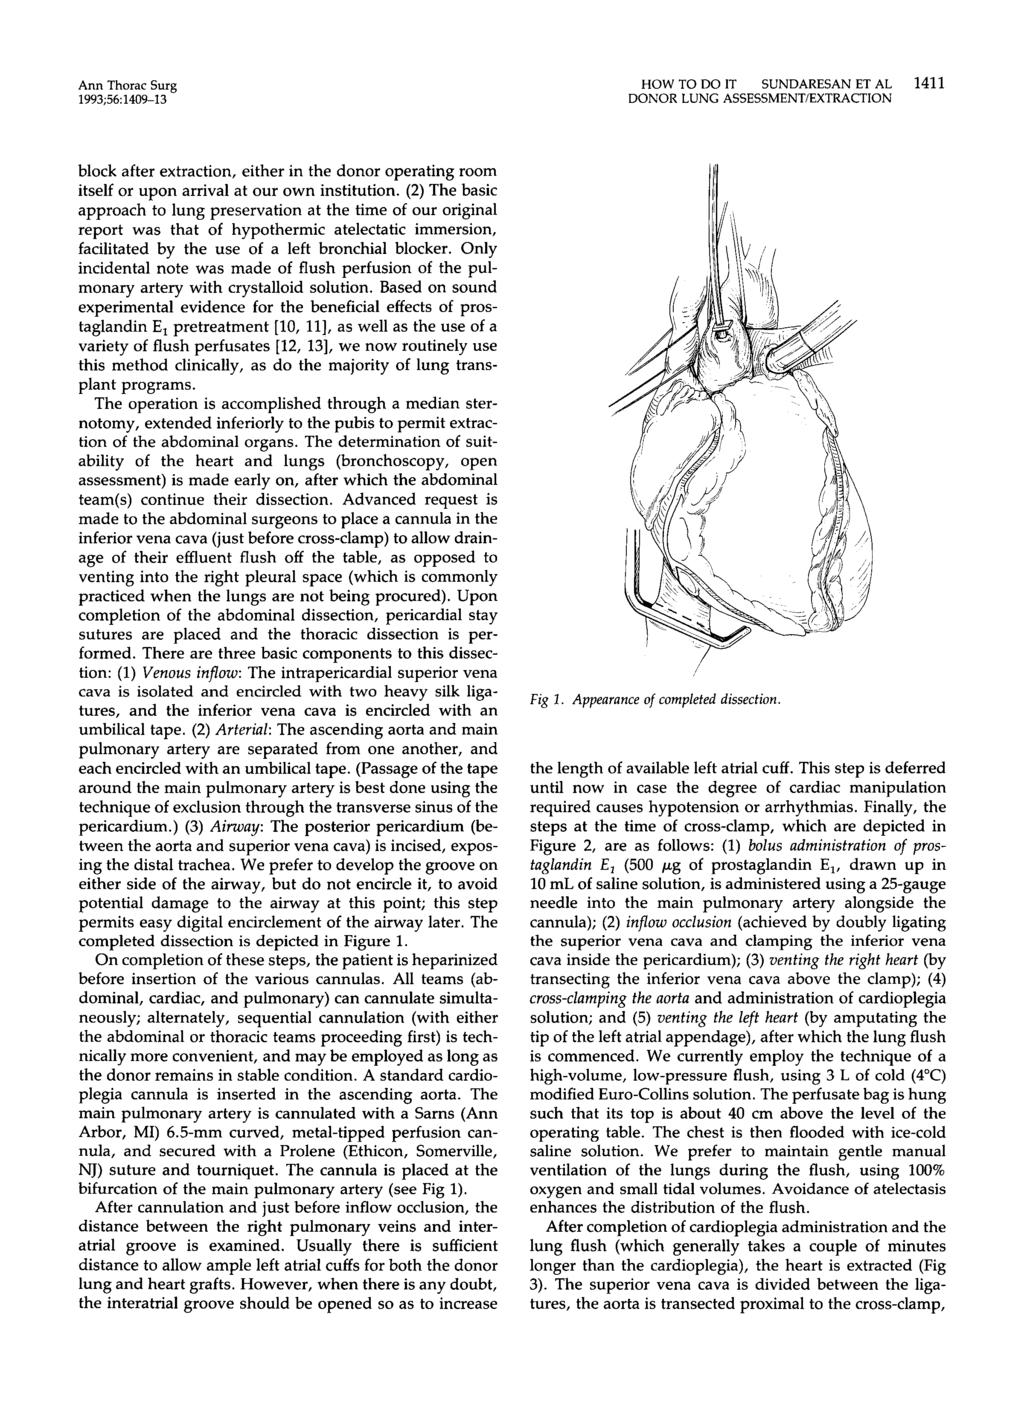 Ann Thorac Surg 1993;56: 1409-13 HOW TO DO IT SUNDARESAN ET AL 1411 DONOR LUNG ASSESSMENTiEXTRACTION block after extraction, either in the donor operating room itself or upon arrival at our own